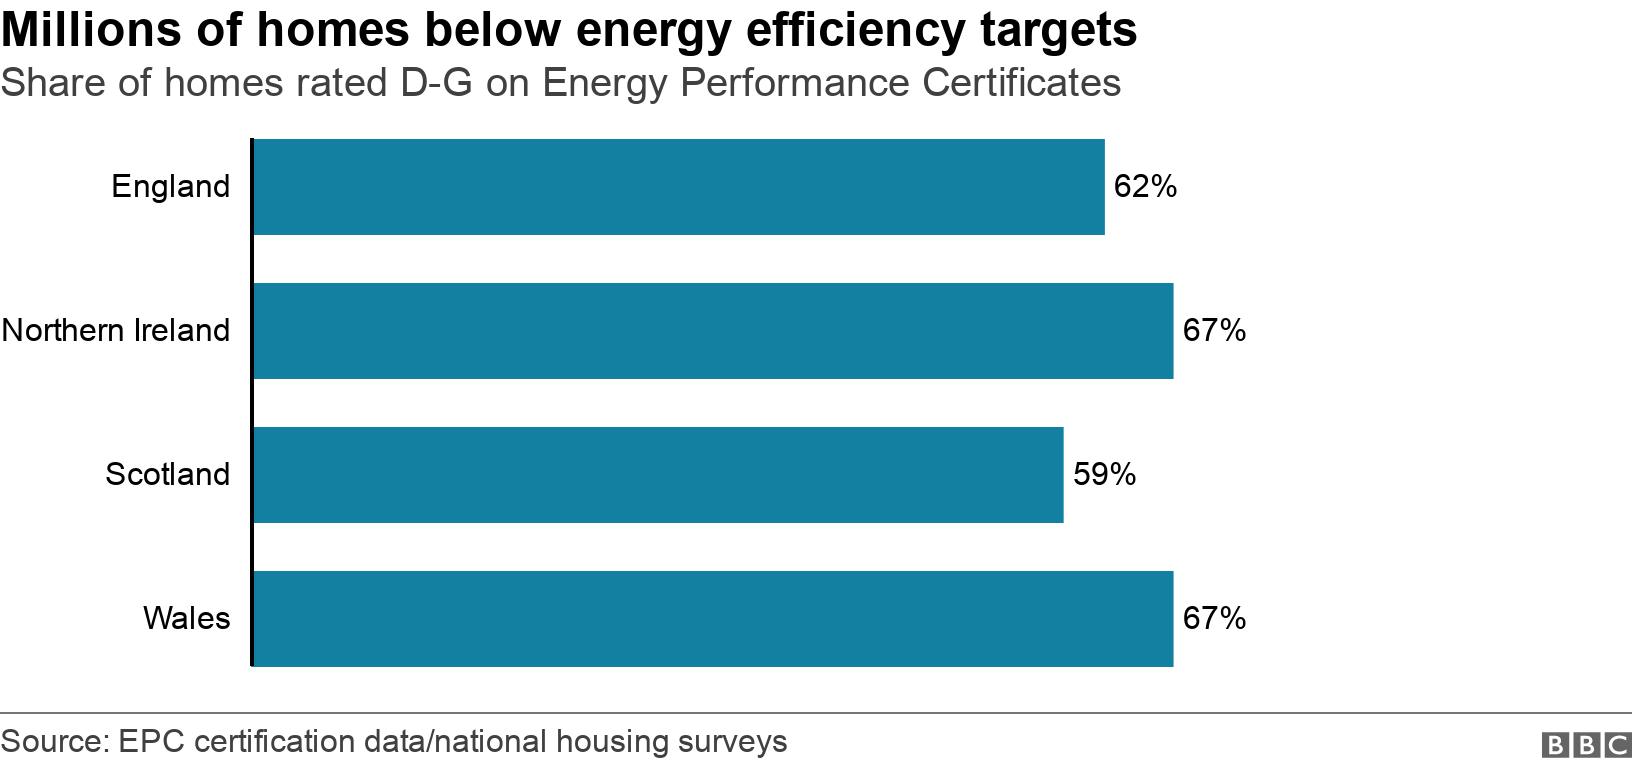 Millions of homes below  energy efficiency targets. Share of homes rated D-G  on Energy Performance Certificates. The chart shows the percentage of homes in the UK which fail to meet long-term energy efficiency targets .